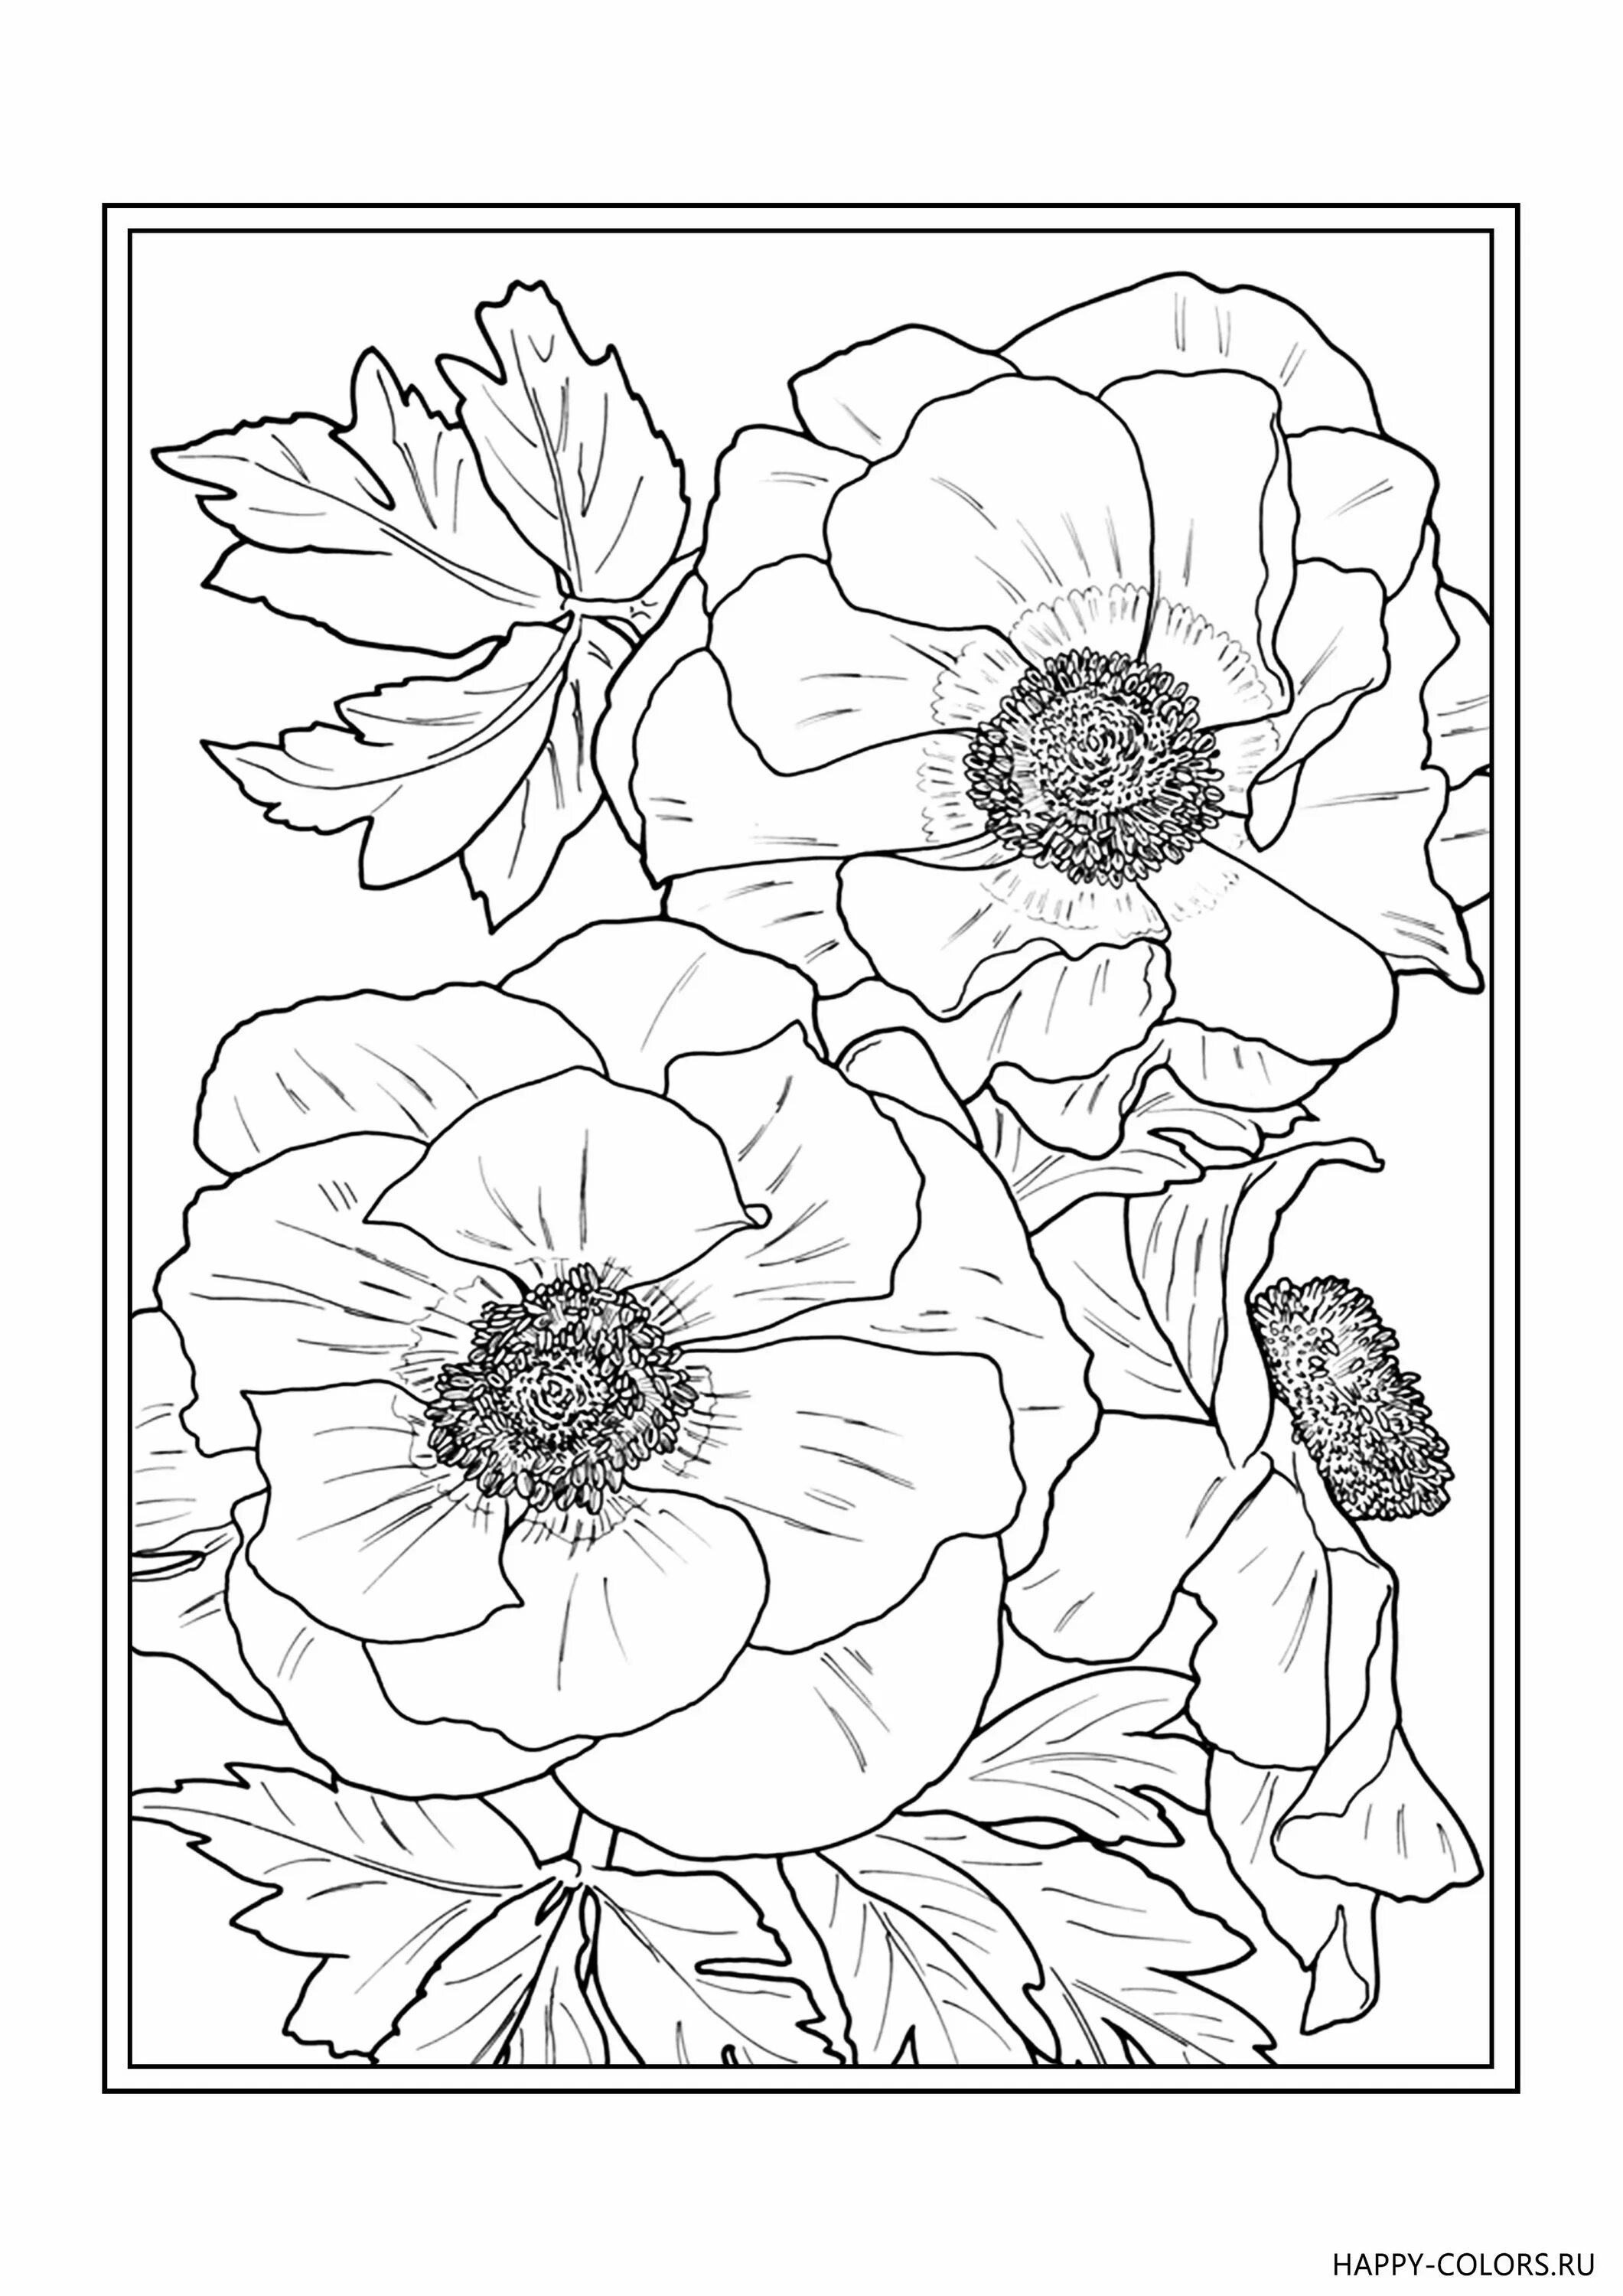 Unique watercolor coloring book for adults